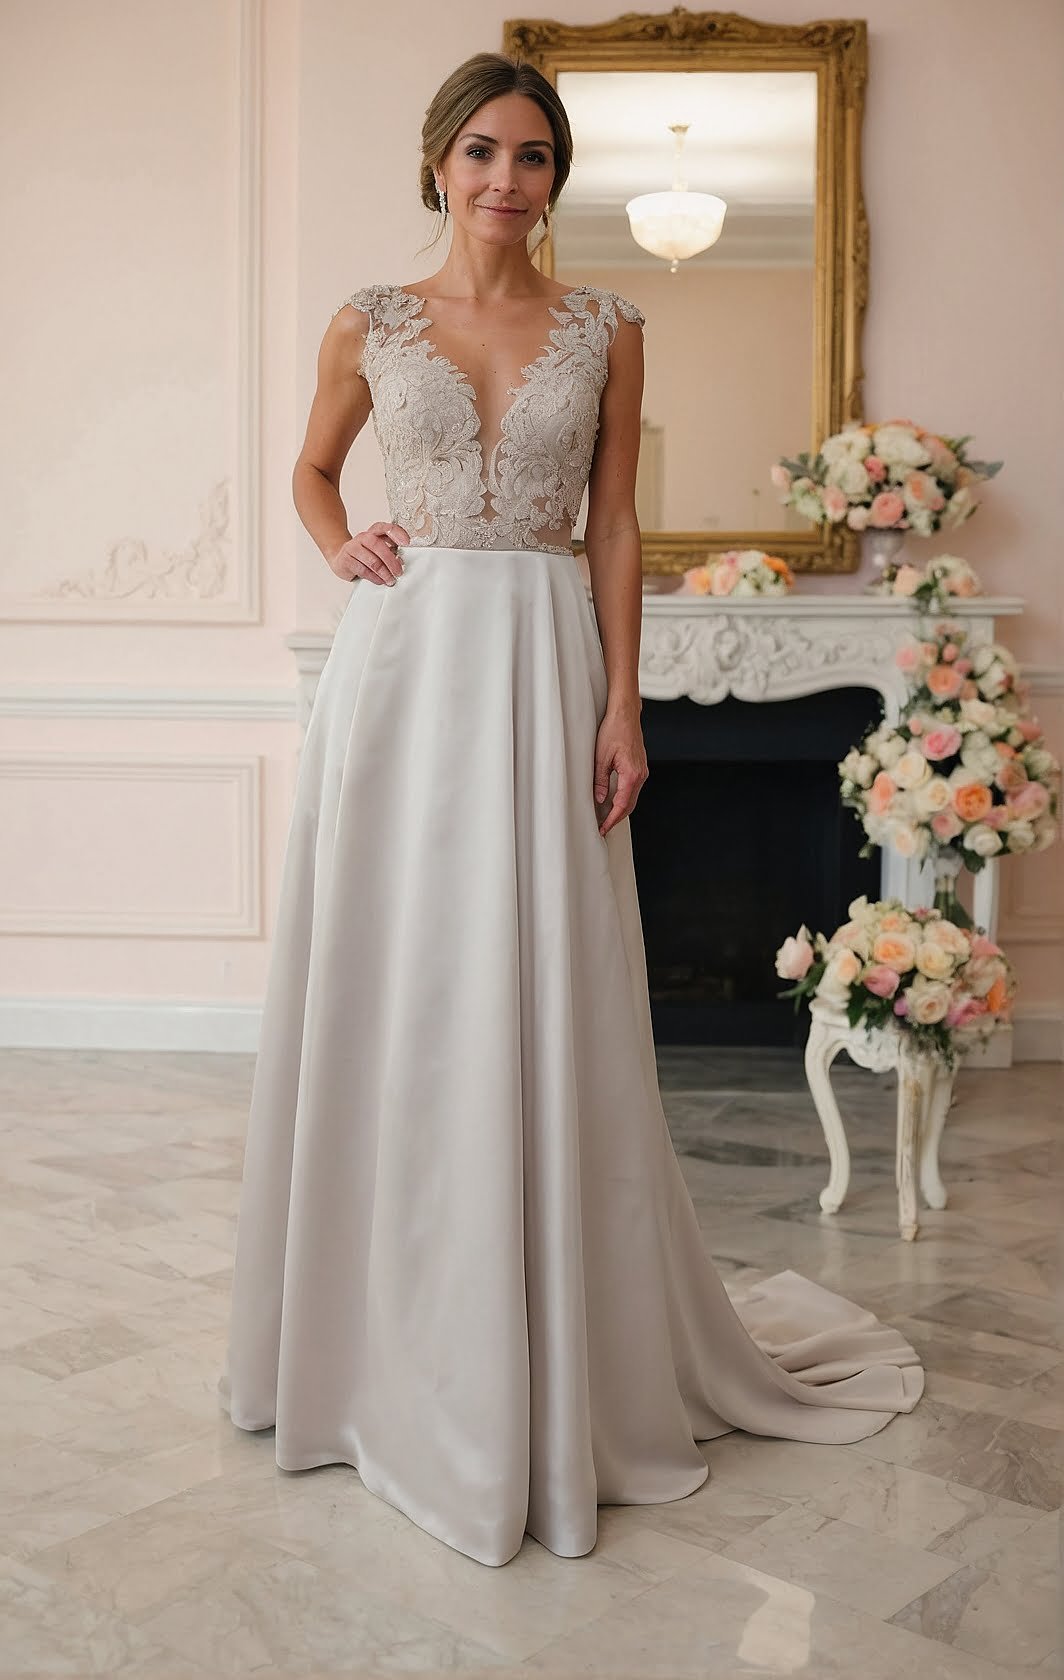 Timeless Sleeveless A-Line Wedding Gown with Delicate Lace Embellishment